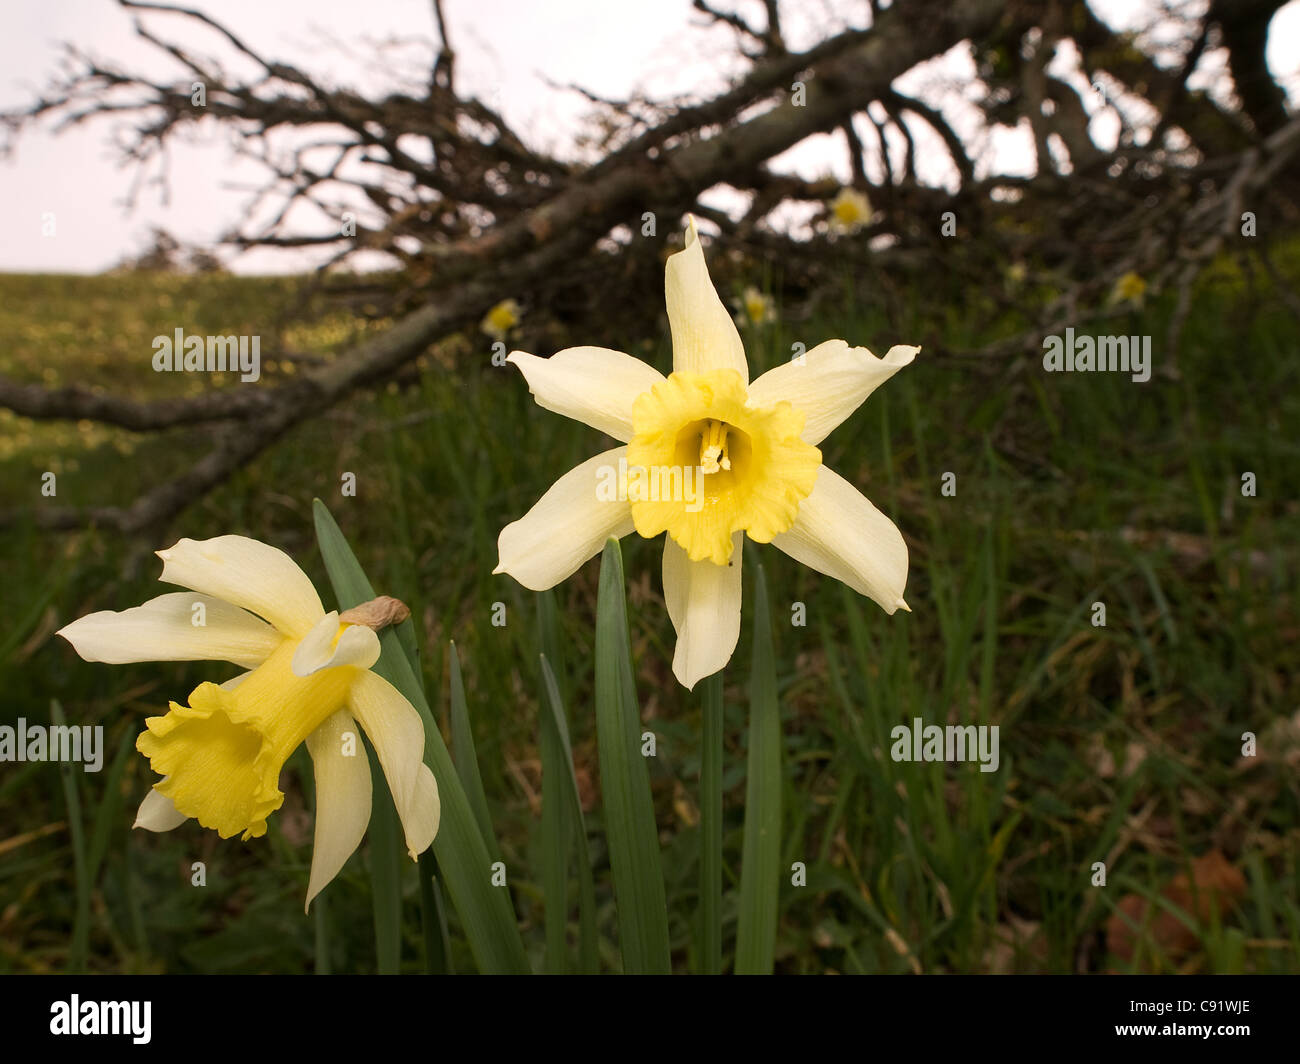 Narcissus varduliensis, daffodil, horizontal portrait of a flowers next to forest. Endangered specie in Europe Stock Photo